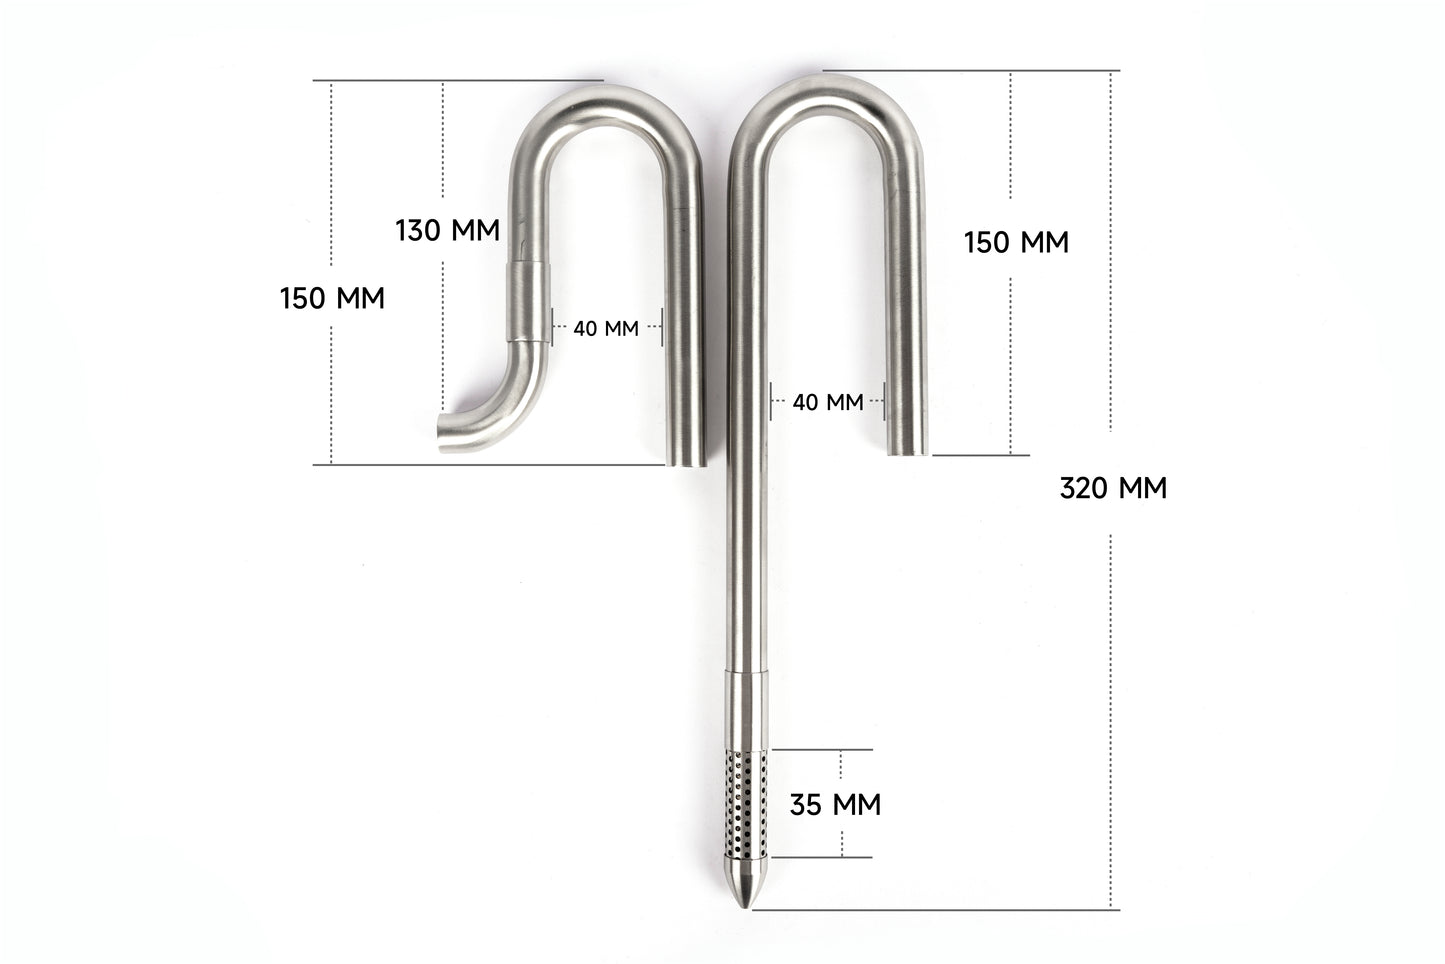 LANDEN 304 Stainless Steel Lily Pipes with Clamps for Rimless Glass Aquarium, Inflow and Outflow Set (Pipe Diameter 16mm)